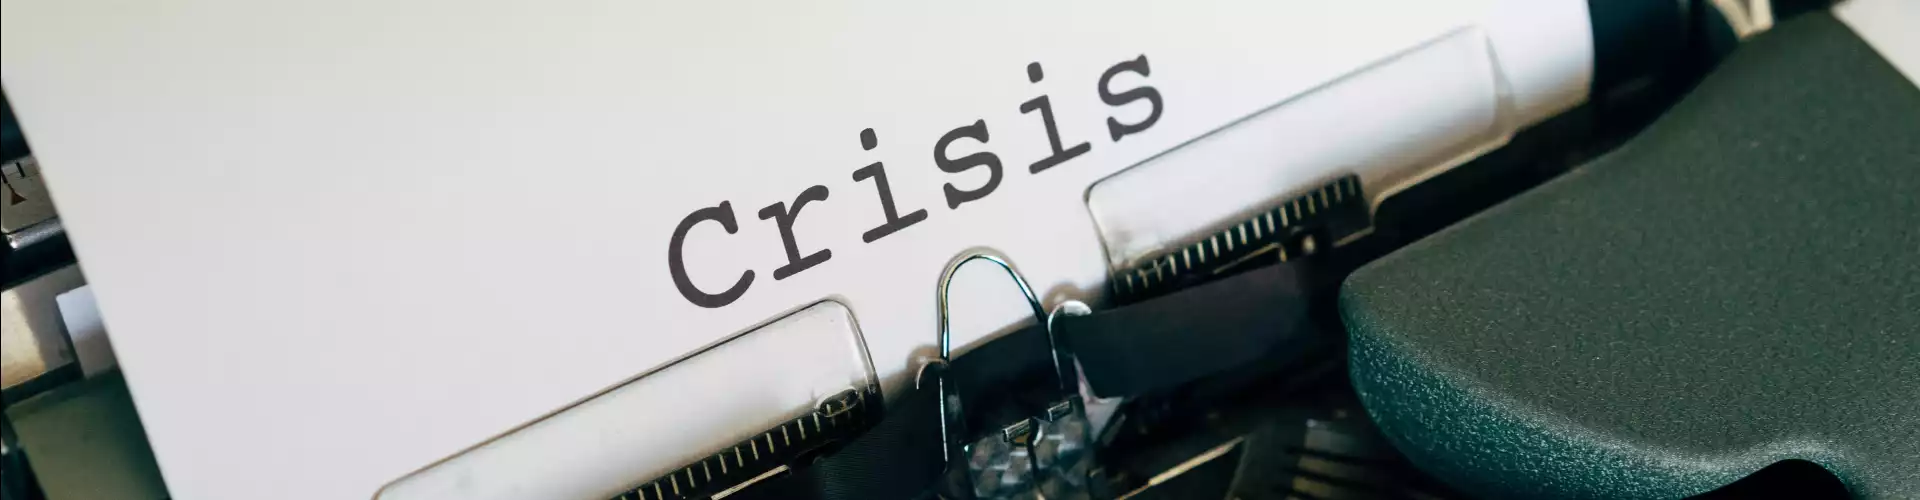 Coming Together in Crisis